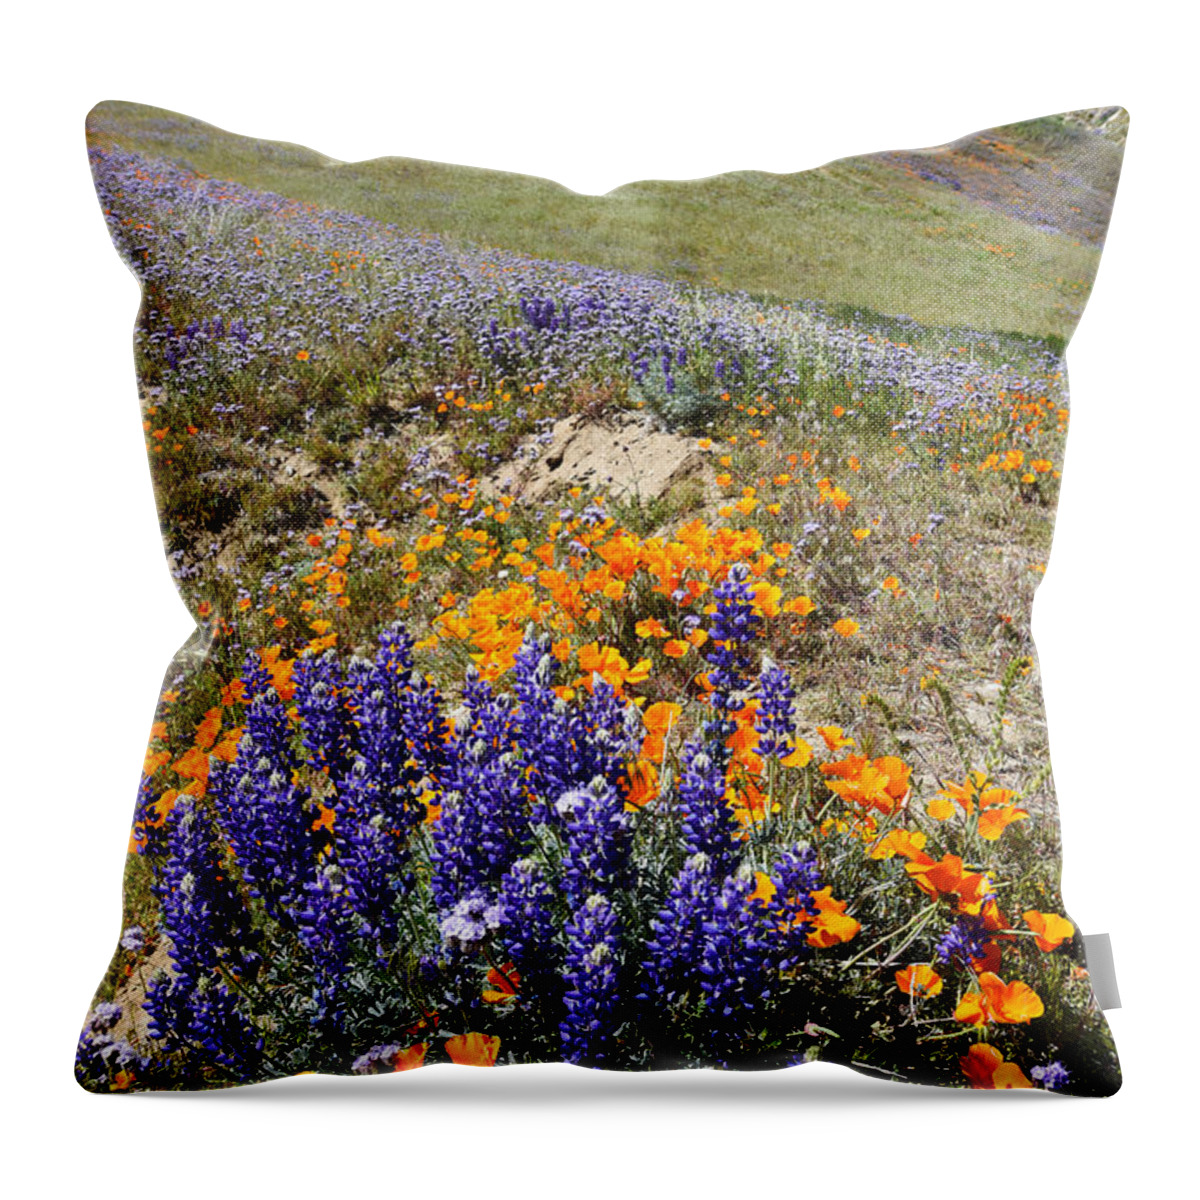 Landscape Throw Pillow featuring the photograph Wildflowers Portrait 2 by Scott Cunningham